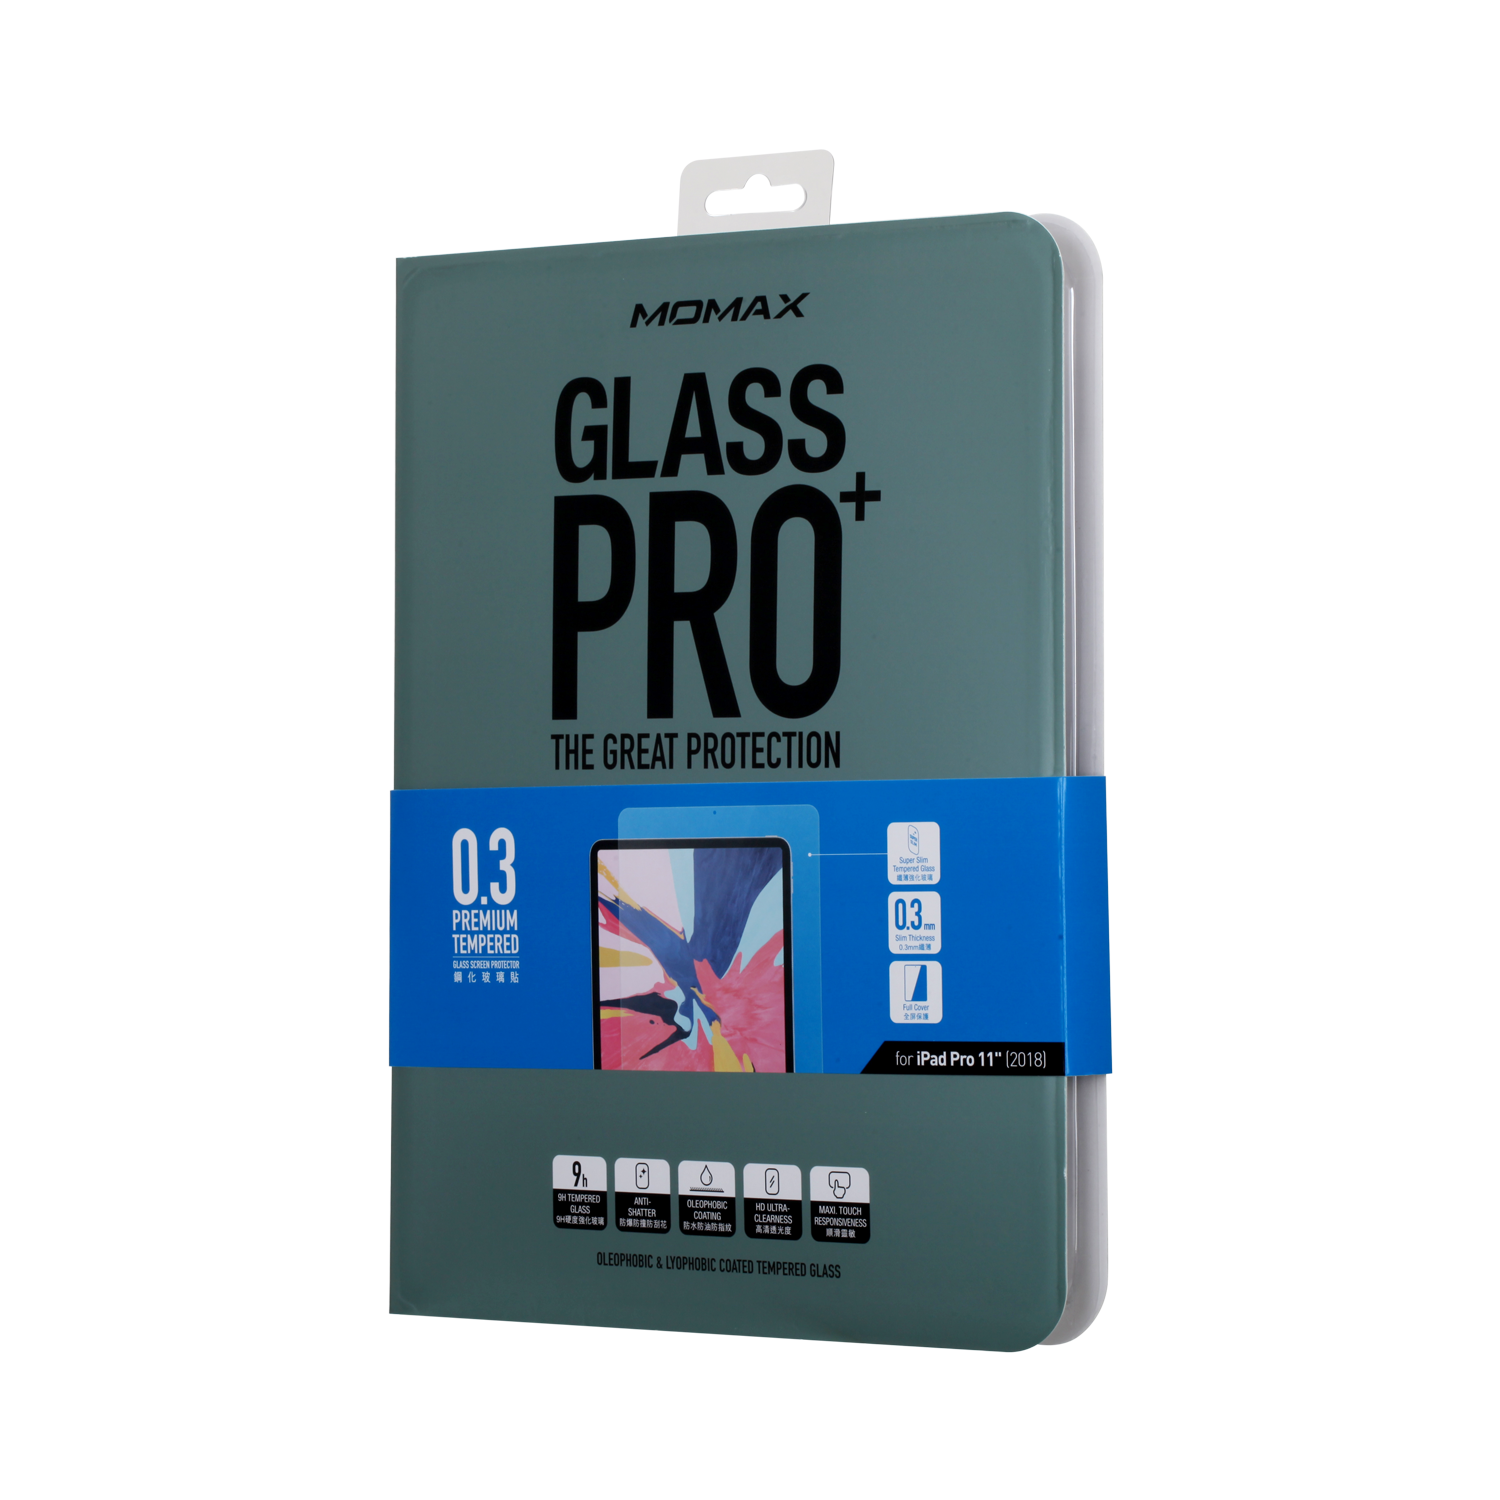 Glass Pro+ | 0.3mm Tempered Glass Screen Protector for iPad Pro 11-inch (2018/2020)